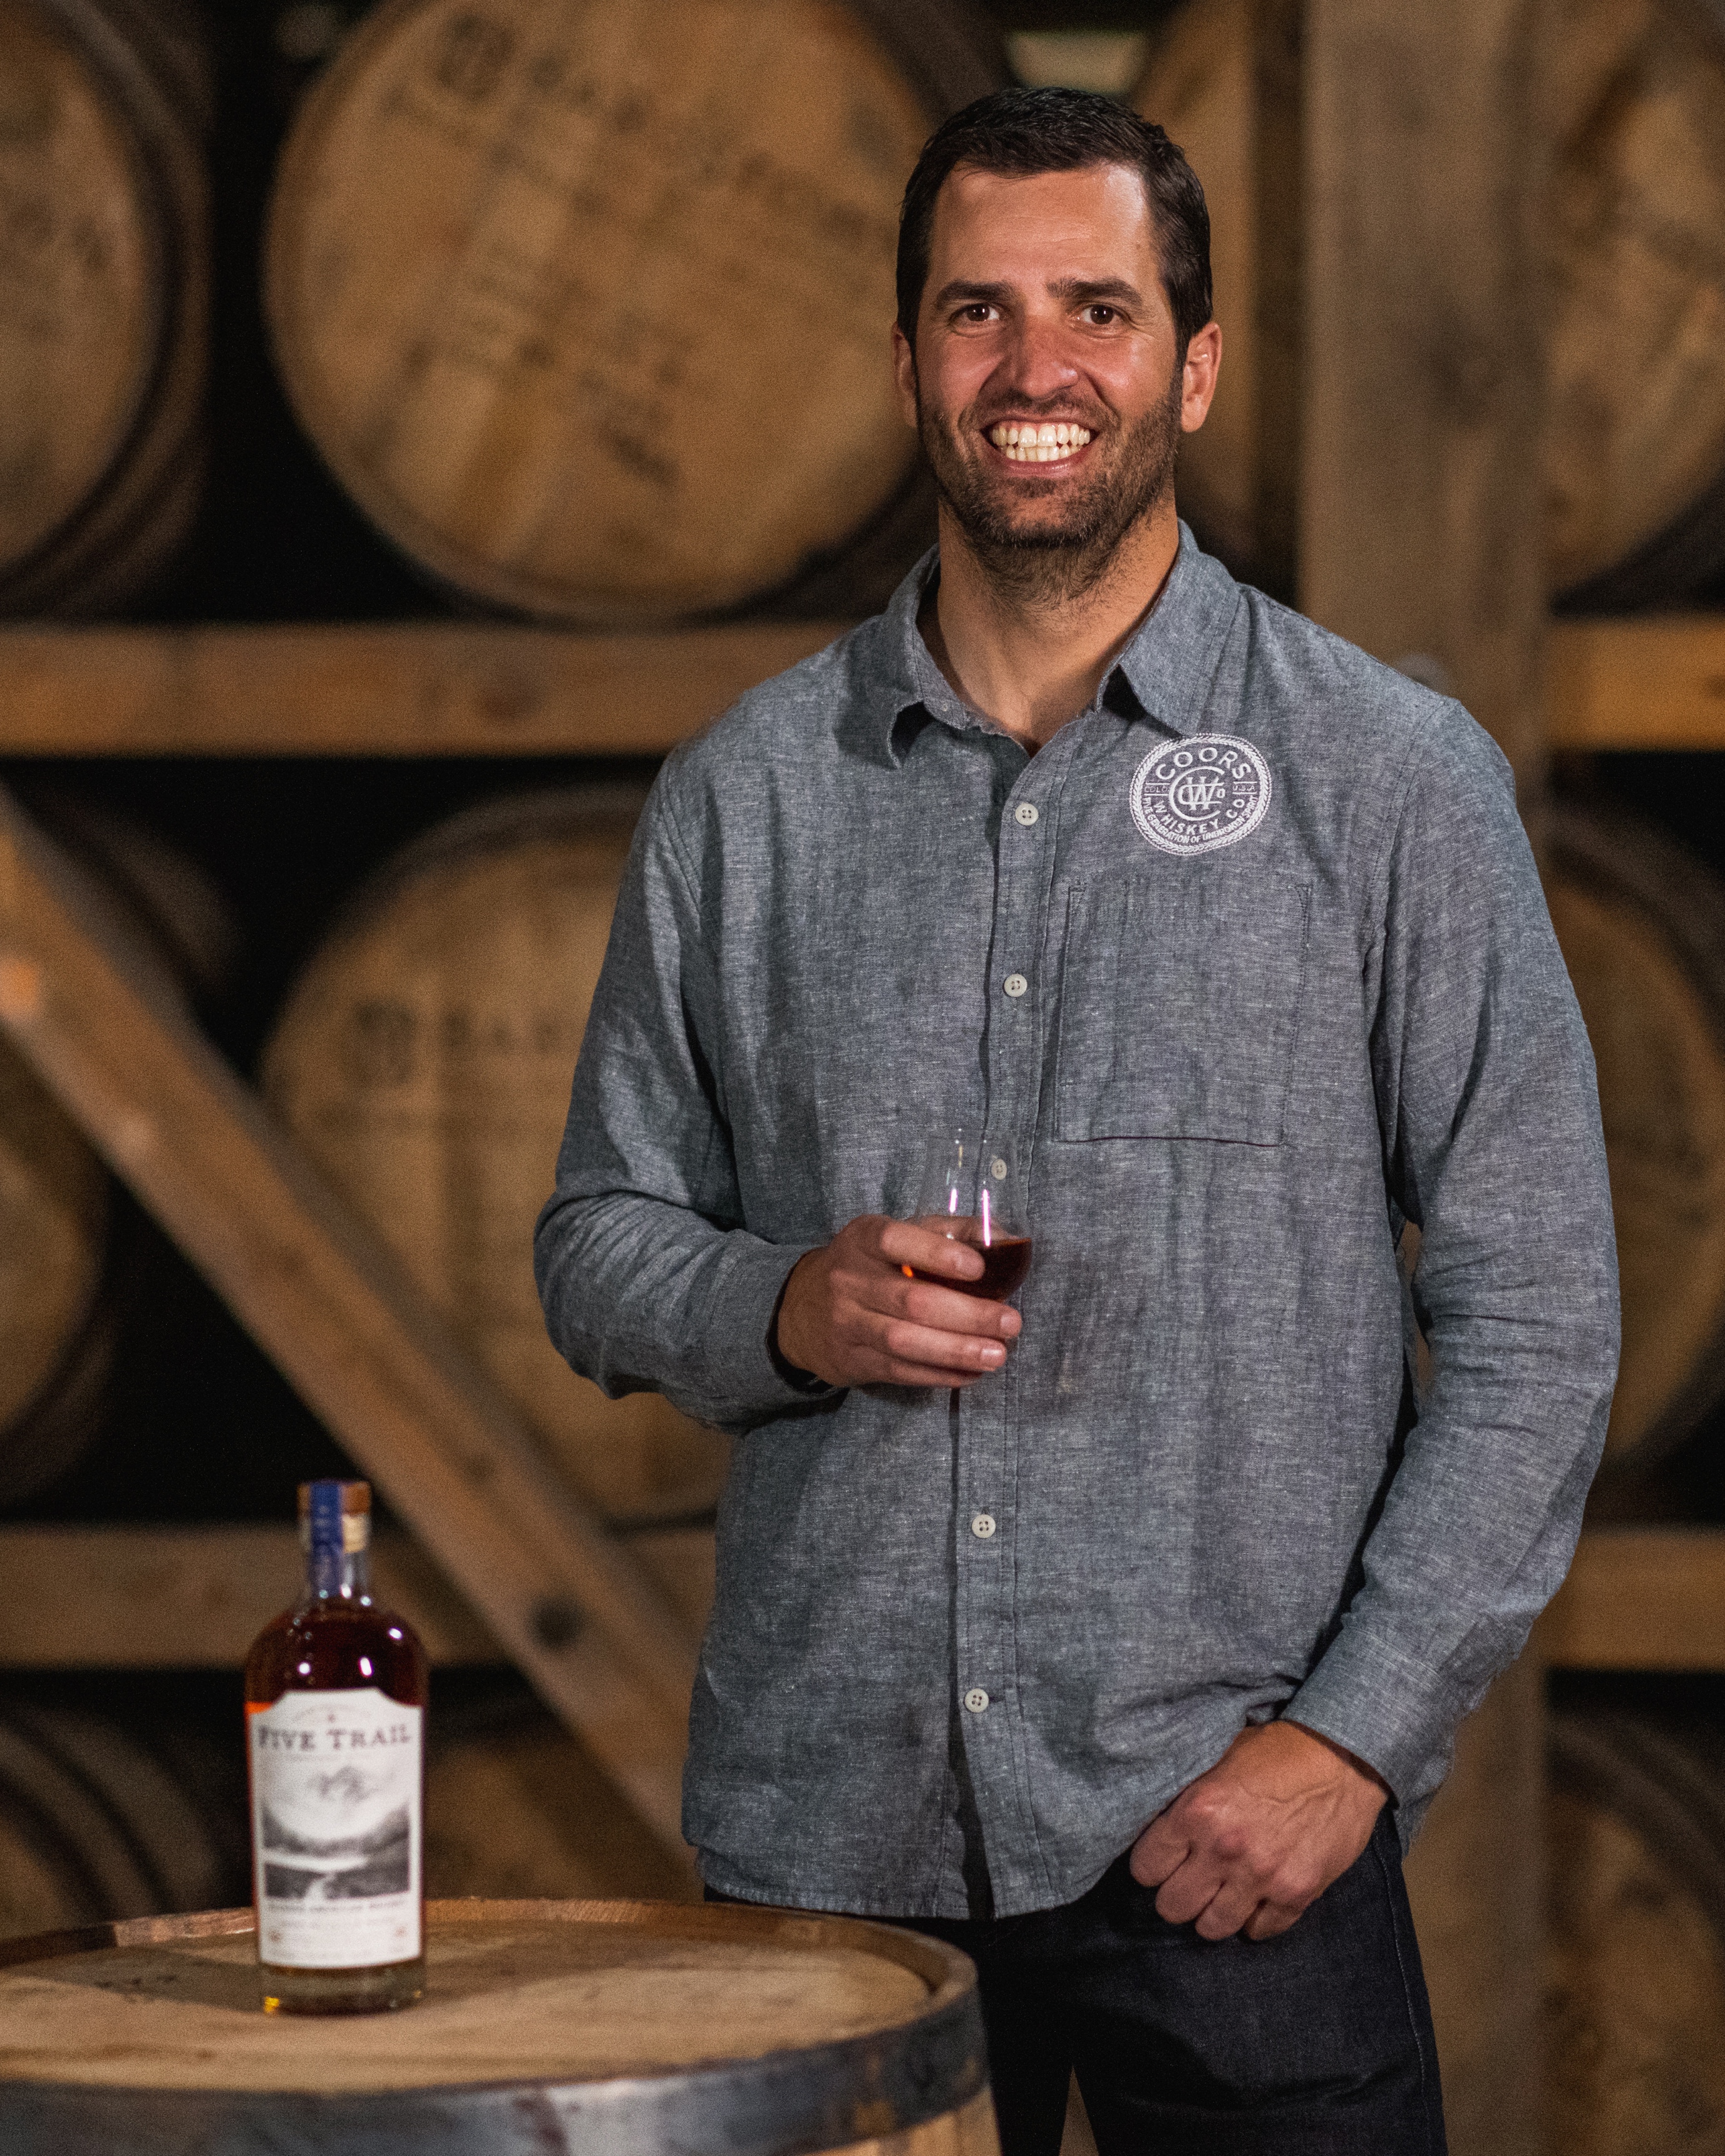 210: Five Trail Whiskey -The Next Generation of Molson Coors Brewing